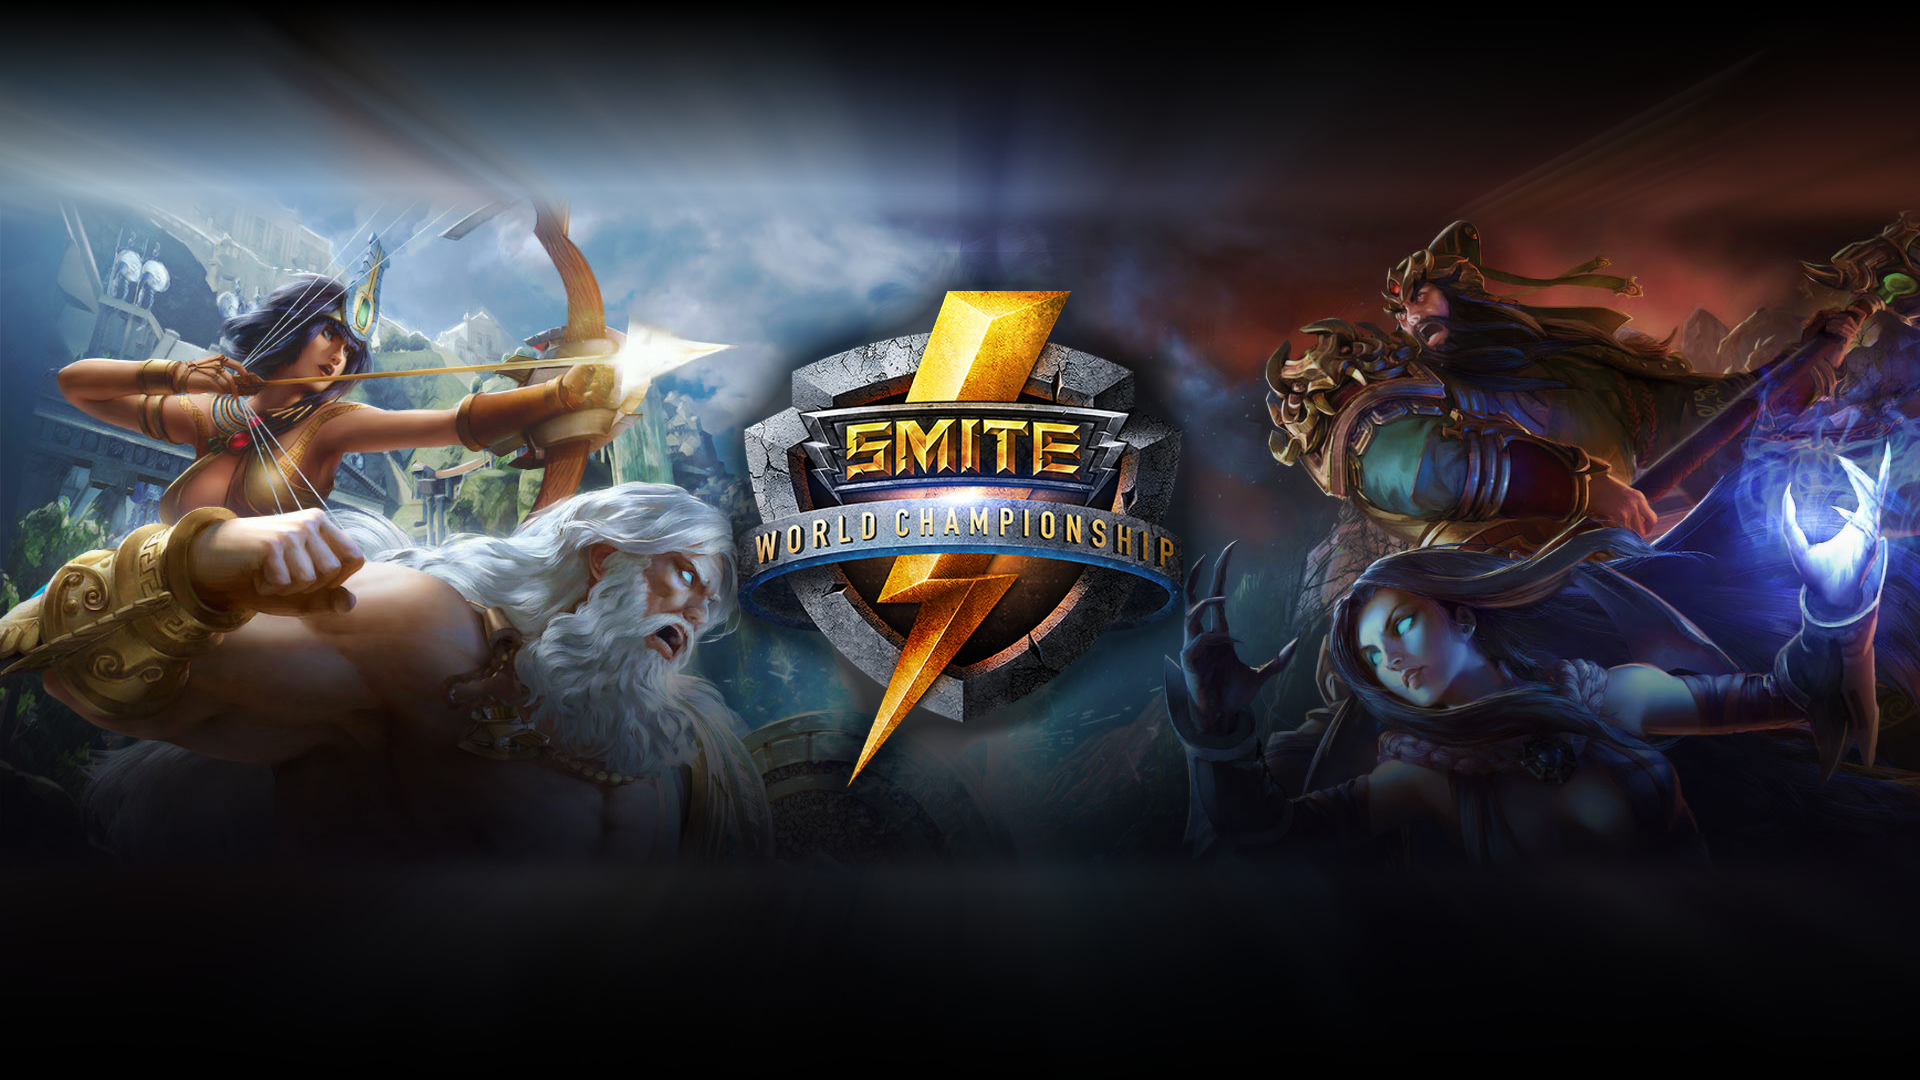 Featured image of post 1080P Smite Wallpapers Origins game rameses ii samsung galaxy mini s3 s5 neo alpha sony xperia compact z1 z2 z3 asus zenfone 720x1280 hd image background 4798